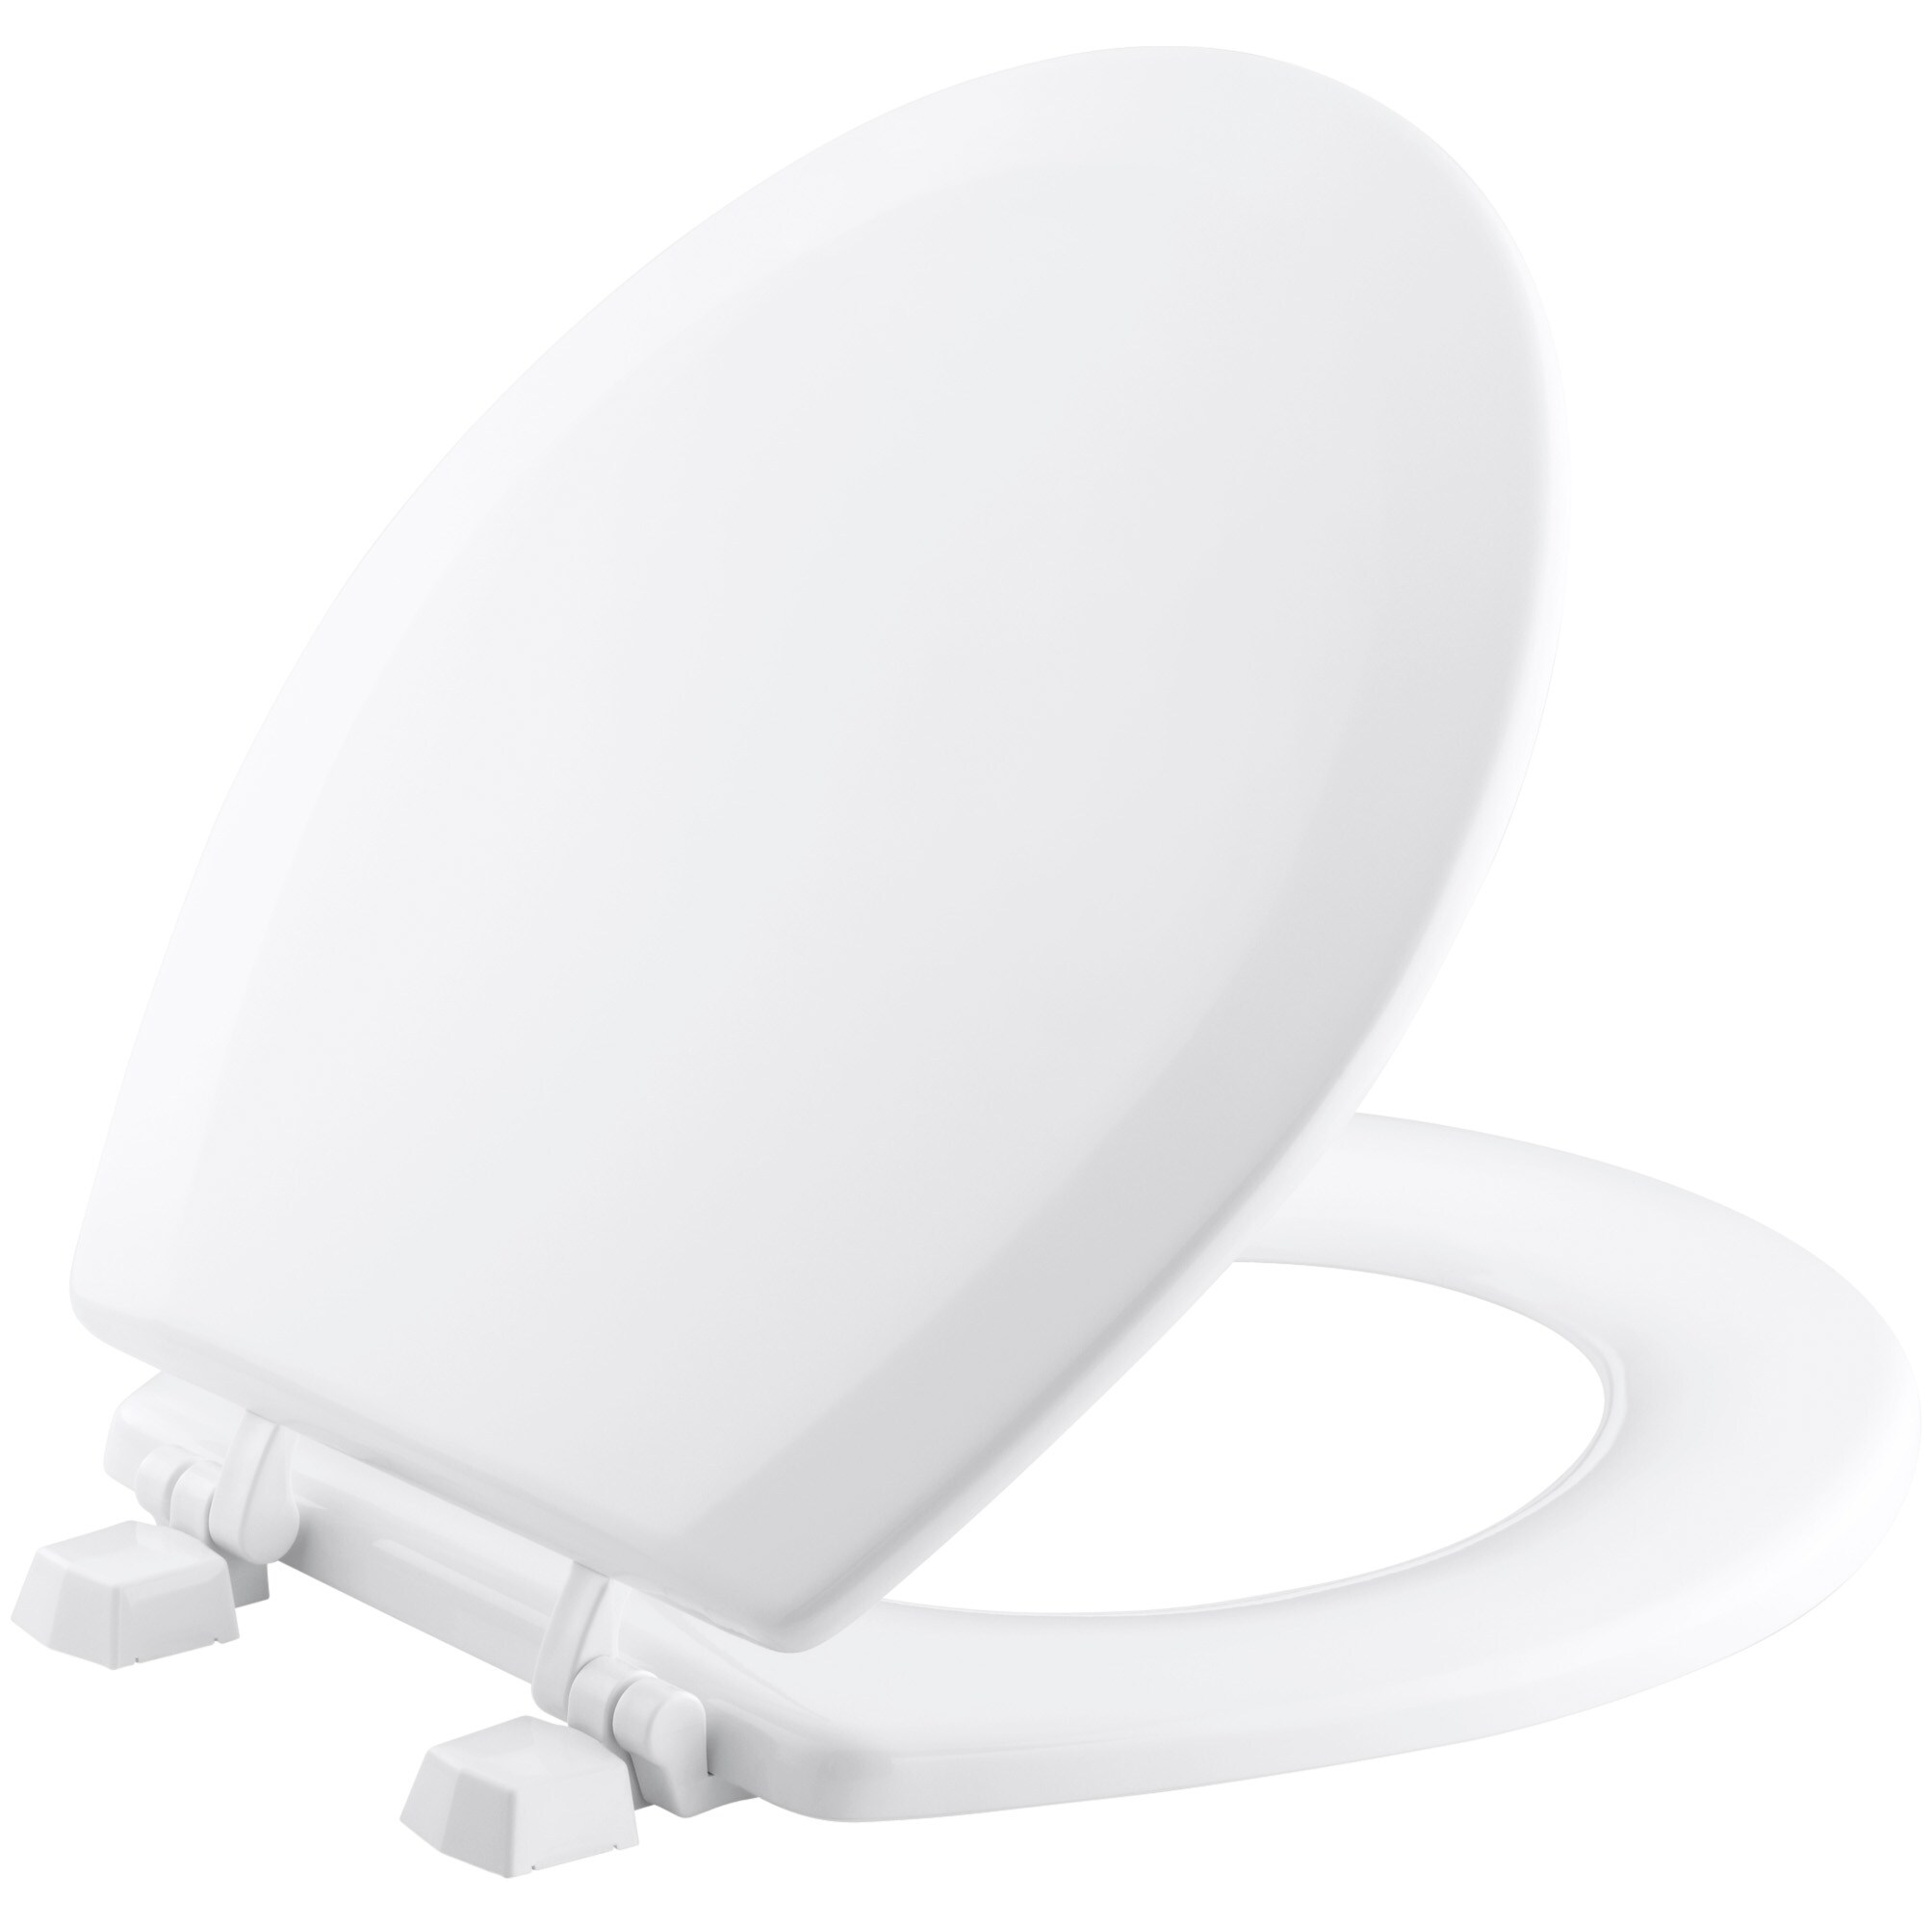 AQUA SOURCE 18.7" BISCUIT TOILET SEAT 02440707 FREE SHIPPING 